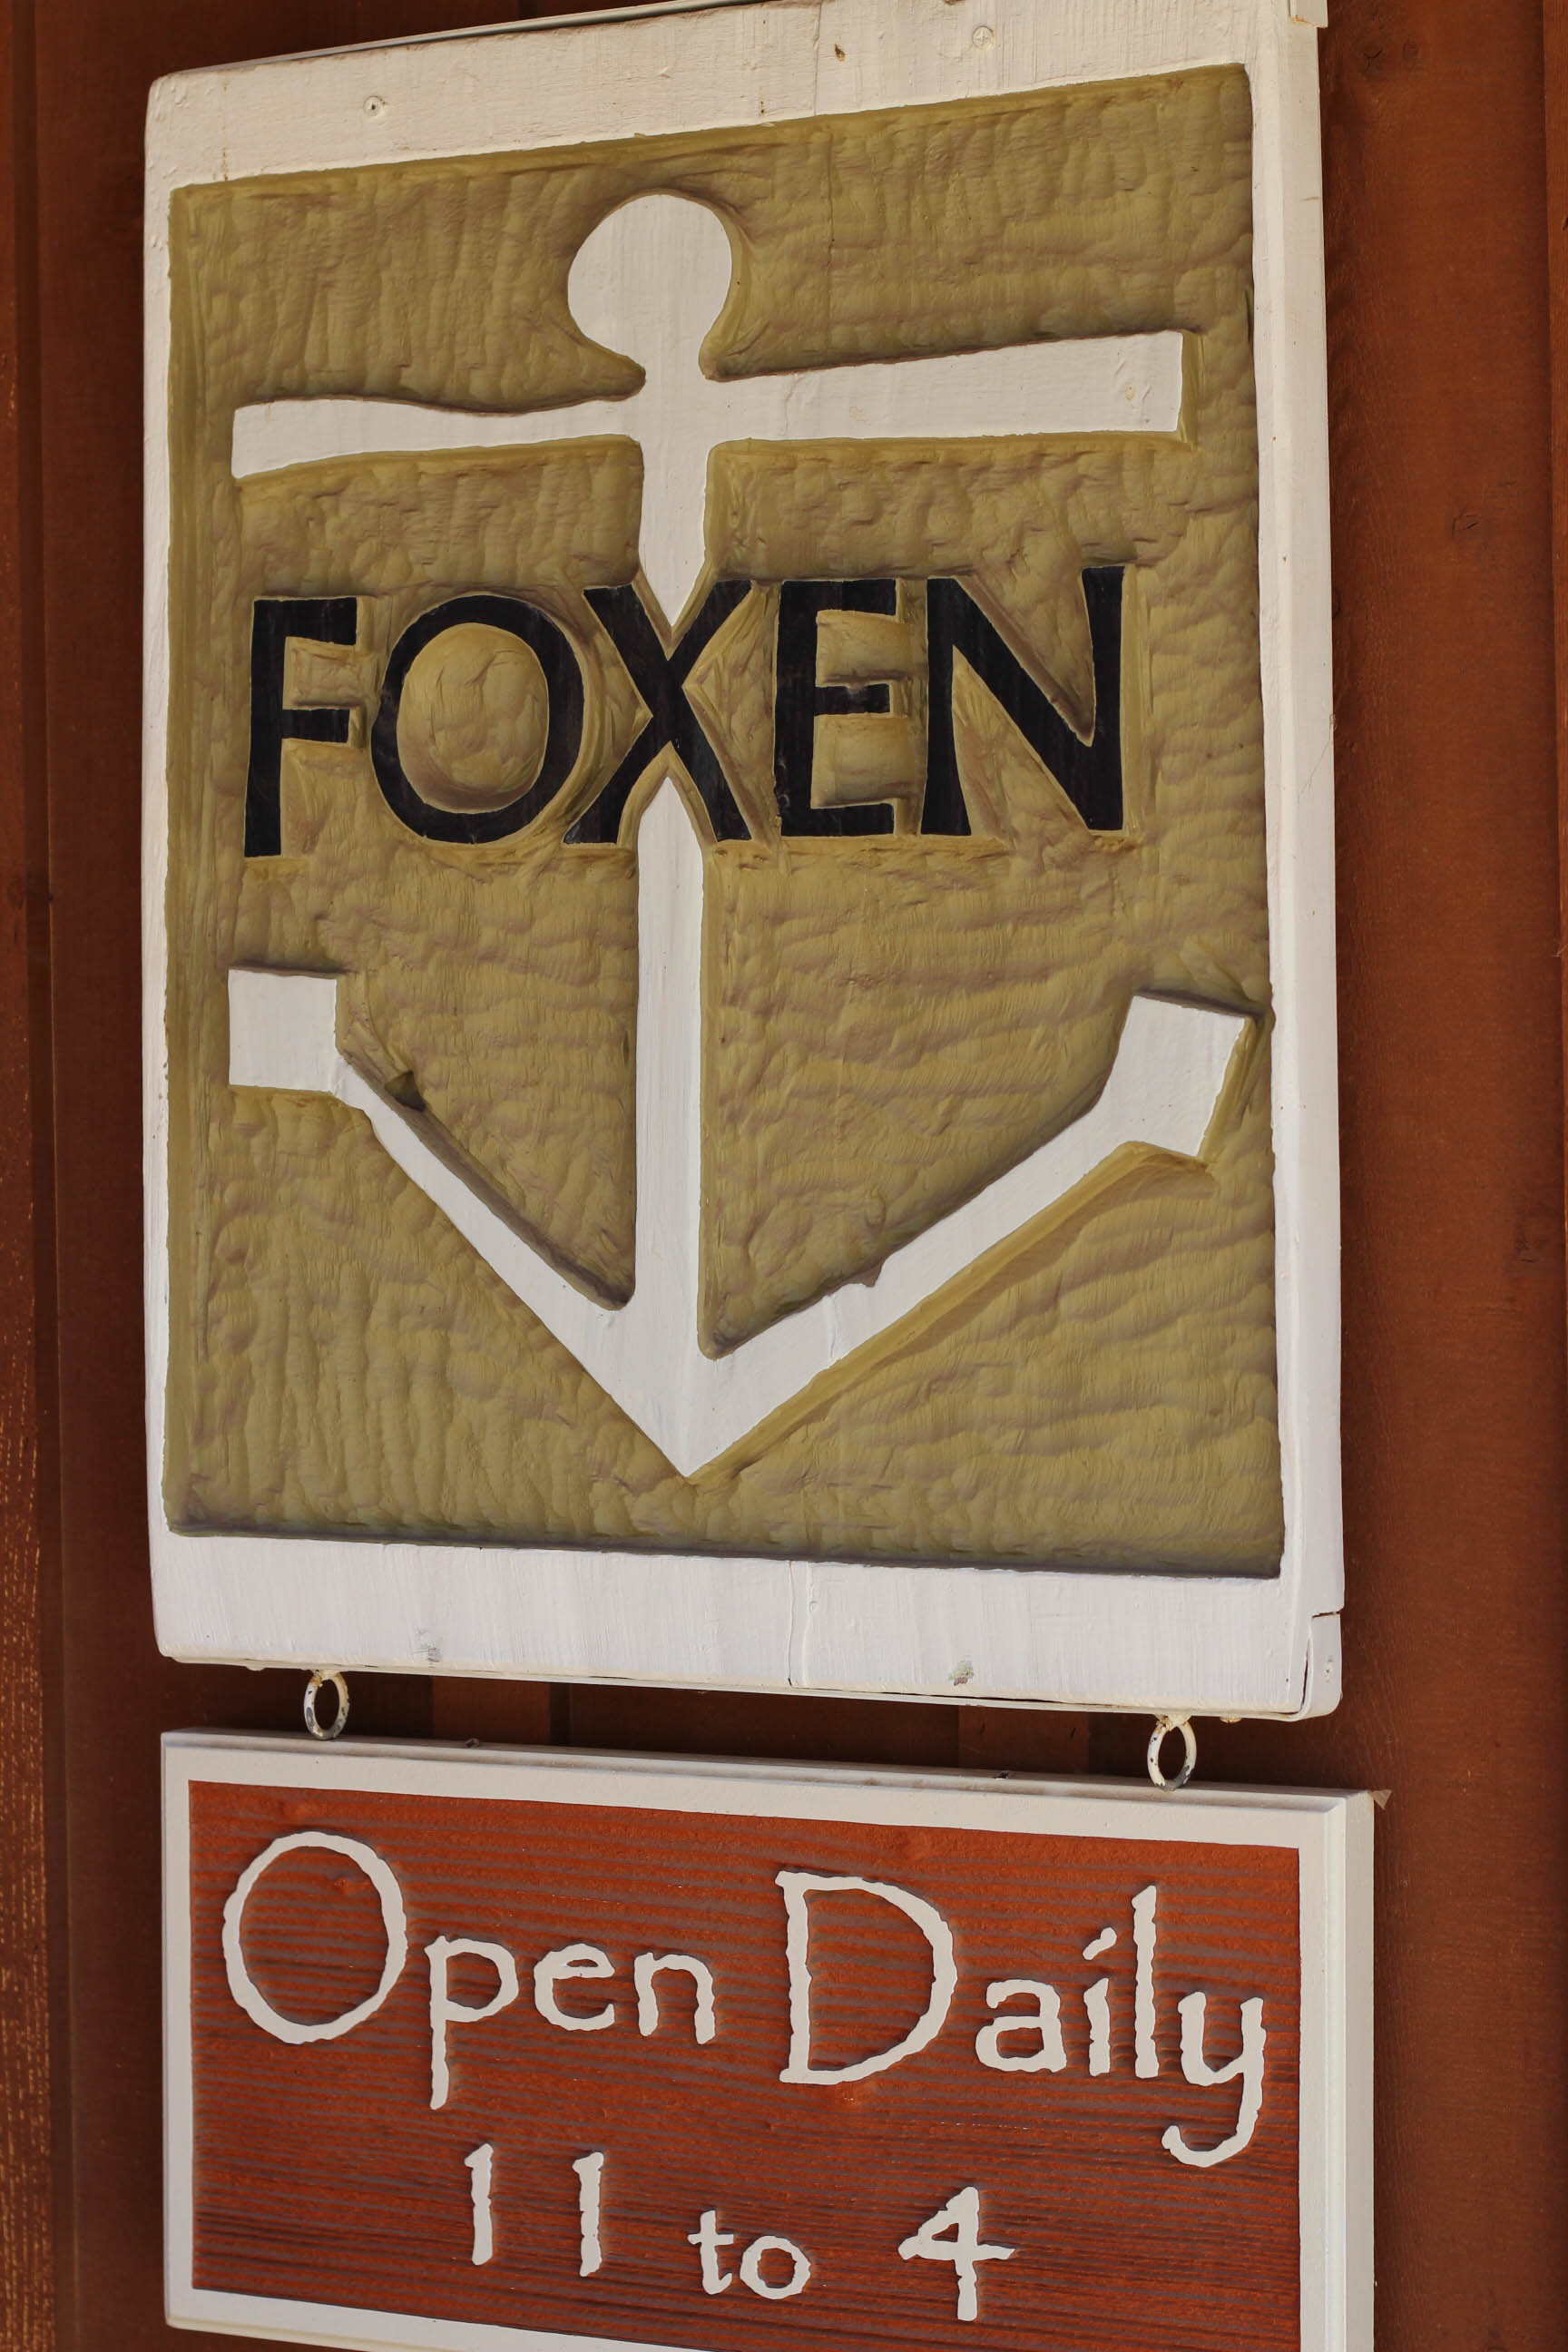 Foxen Winery and Vineyards